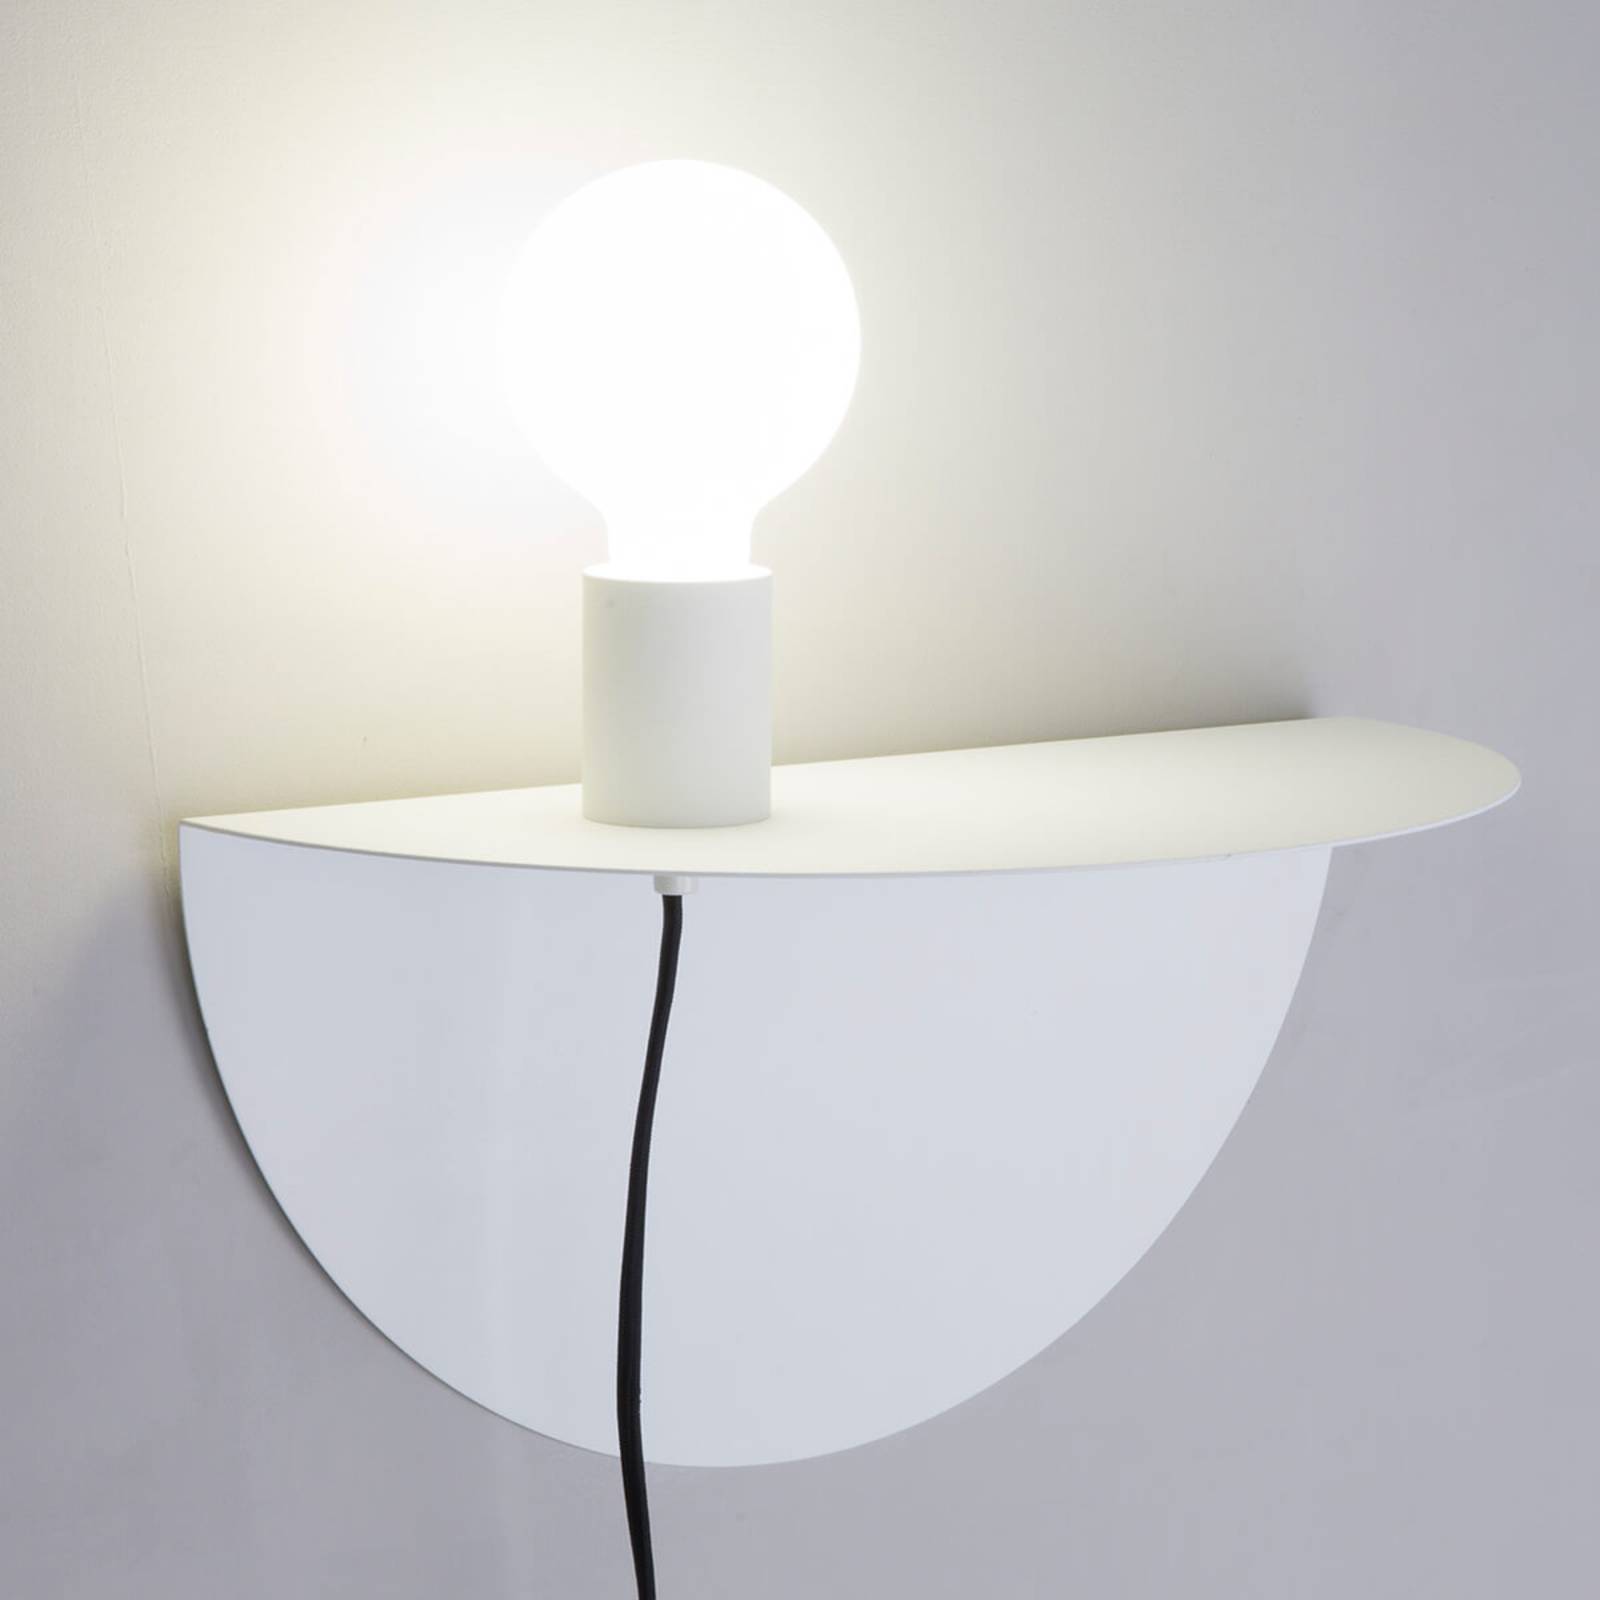 Practical Nit wall light with storage area